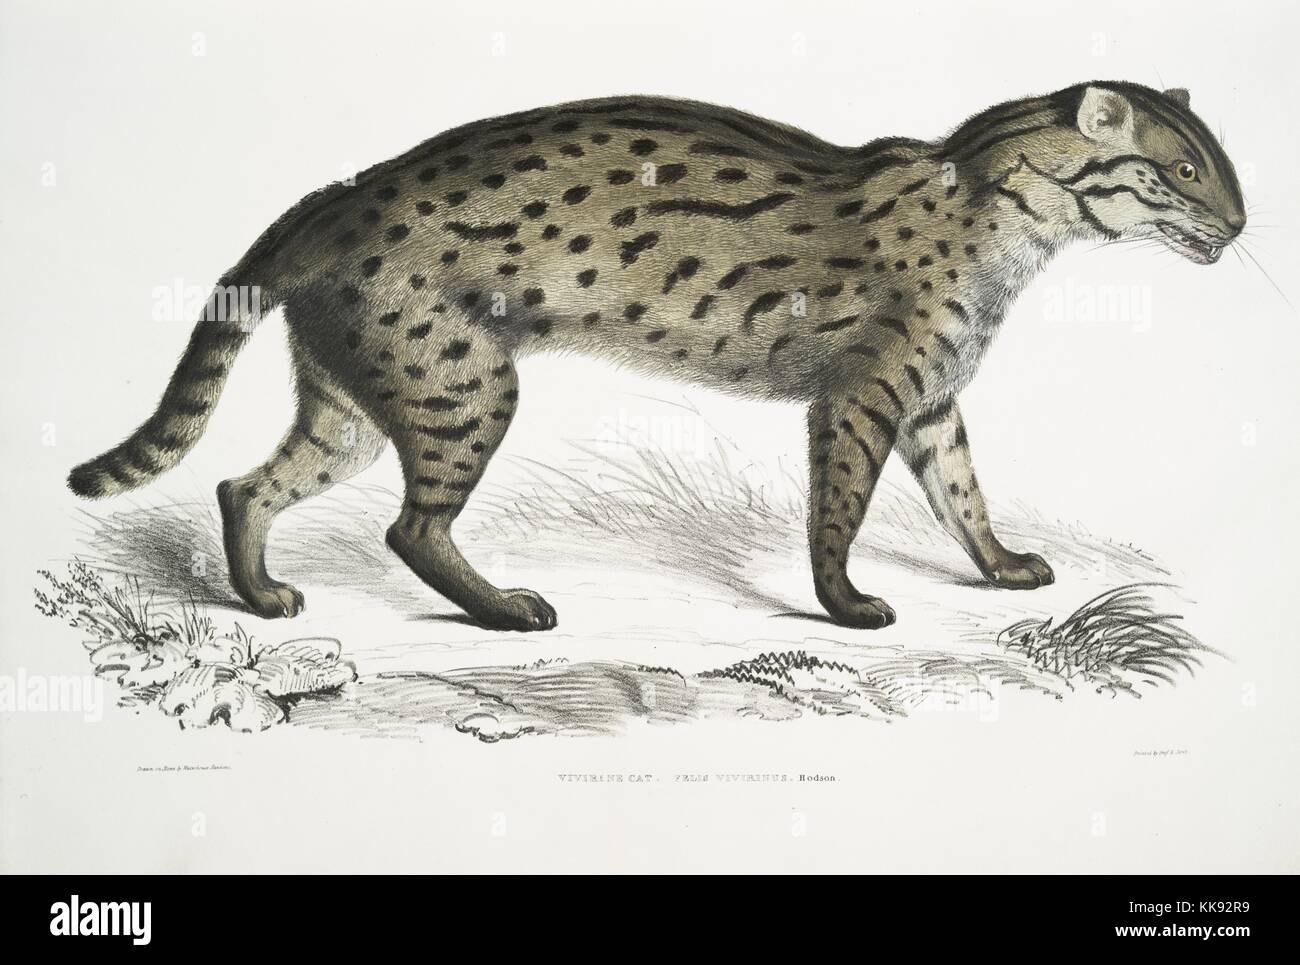 Hand colored print depicting a Vivirine Cat in a field, captioned Vivirine Cat (Felis vivirinus), from the book 'Illustrations of Indian Zoology, Chiefly from the Collection of Major General Hardwicke', 1832. From the New York Public Library. Stock Photo